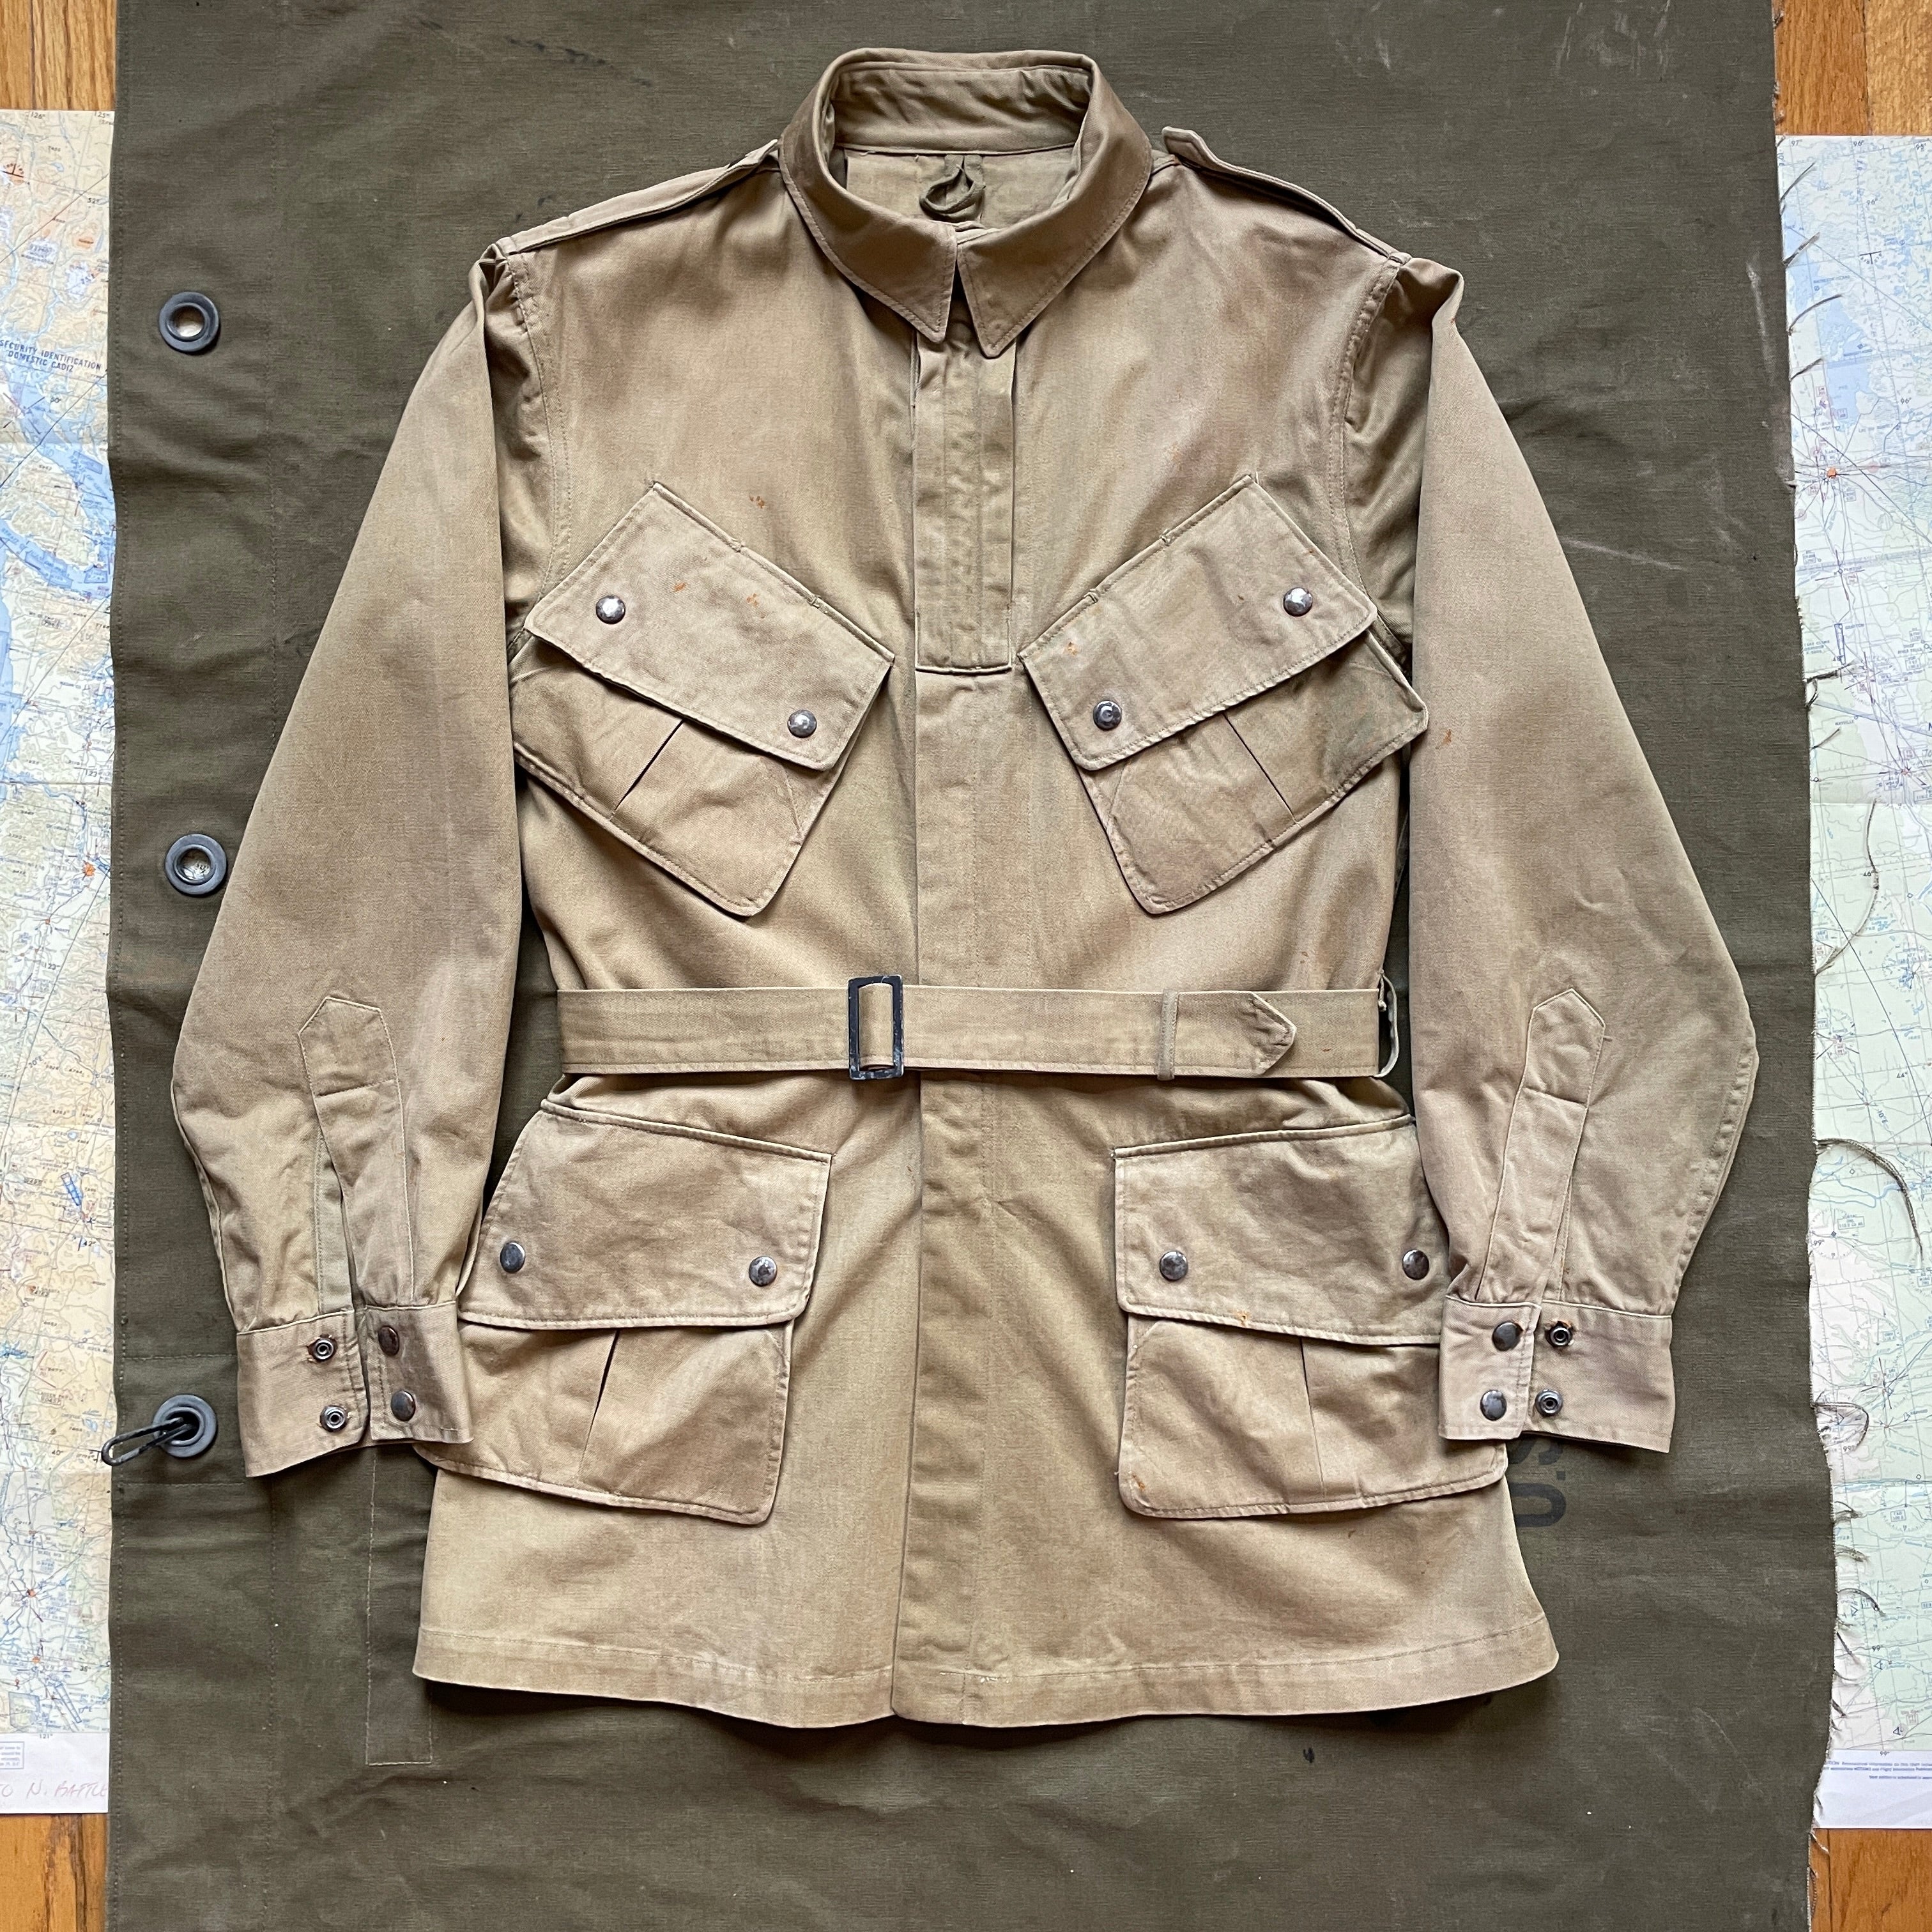 US Army M42 Paratrooper Jump Jacket – The Major's Tailor